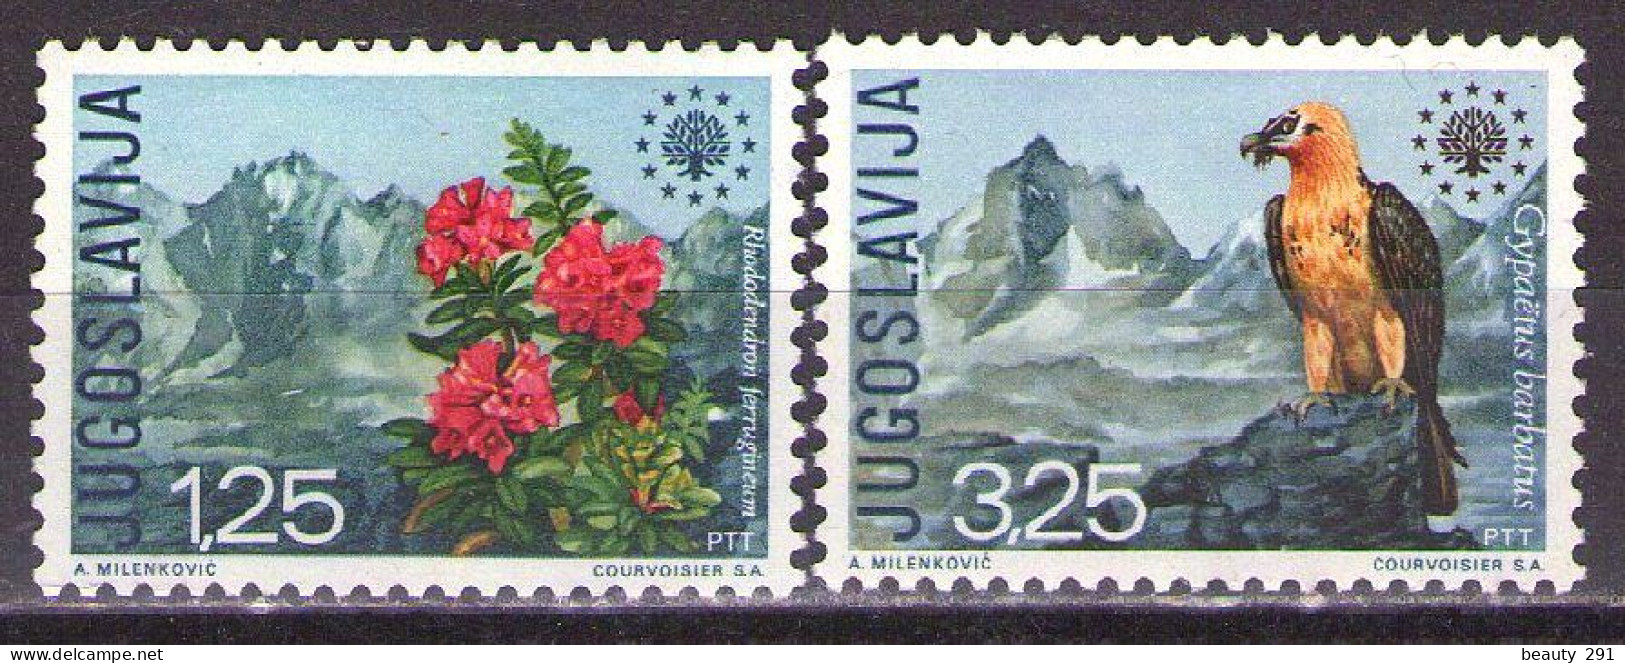 Yugoslavia 1970 - European Nature Protection - Nature Conservation Year - Mi 1406-1407 - MNH**VF - Unused Stamps